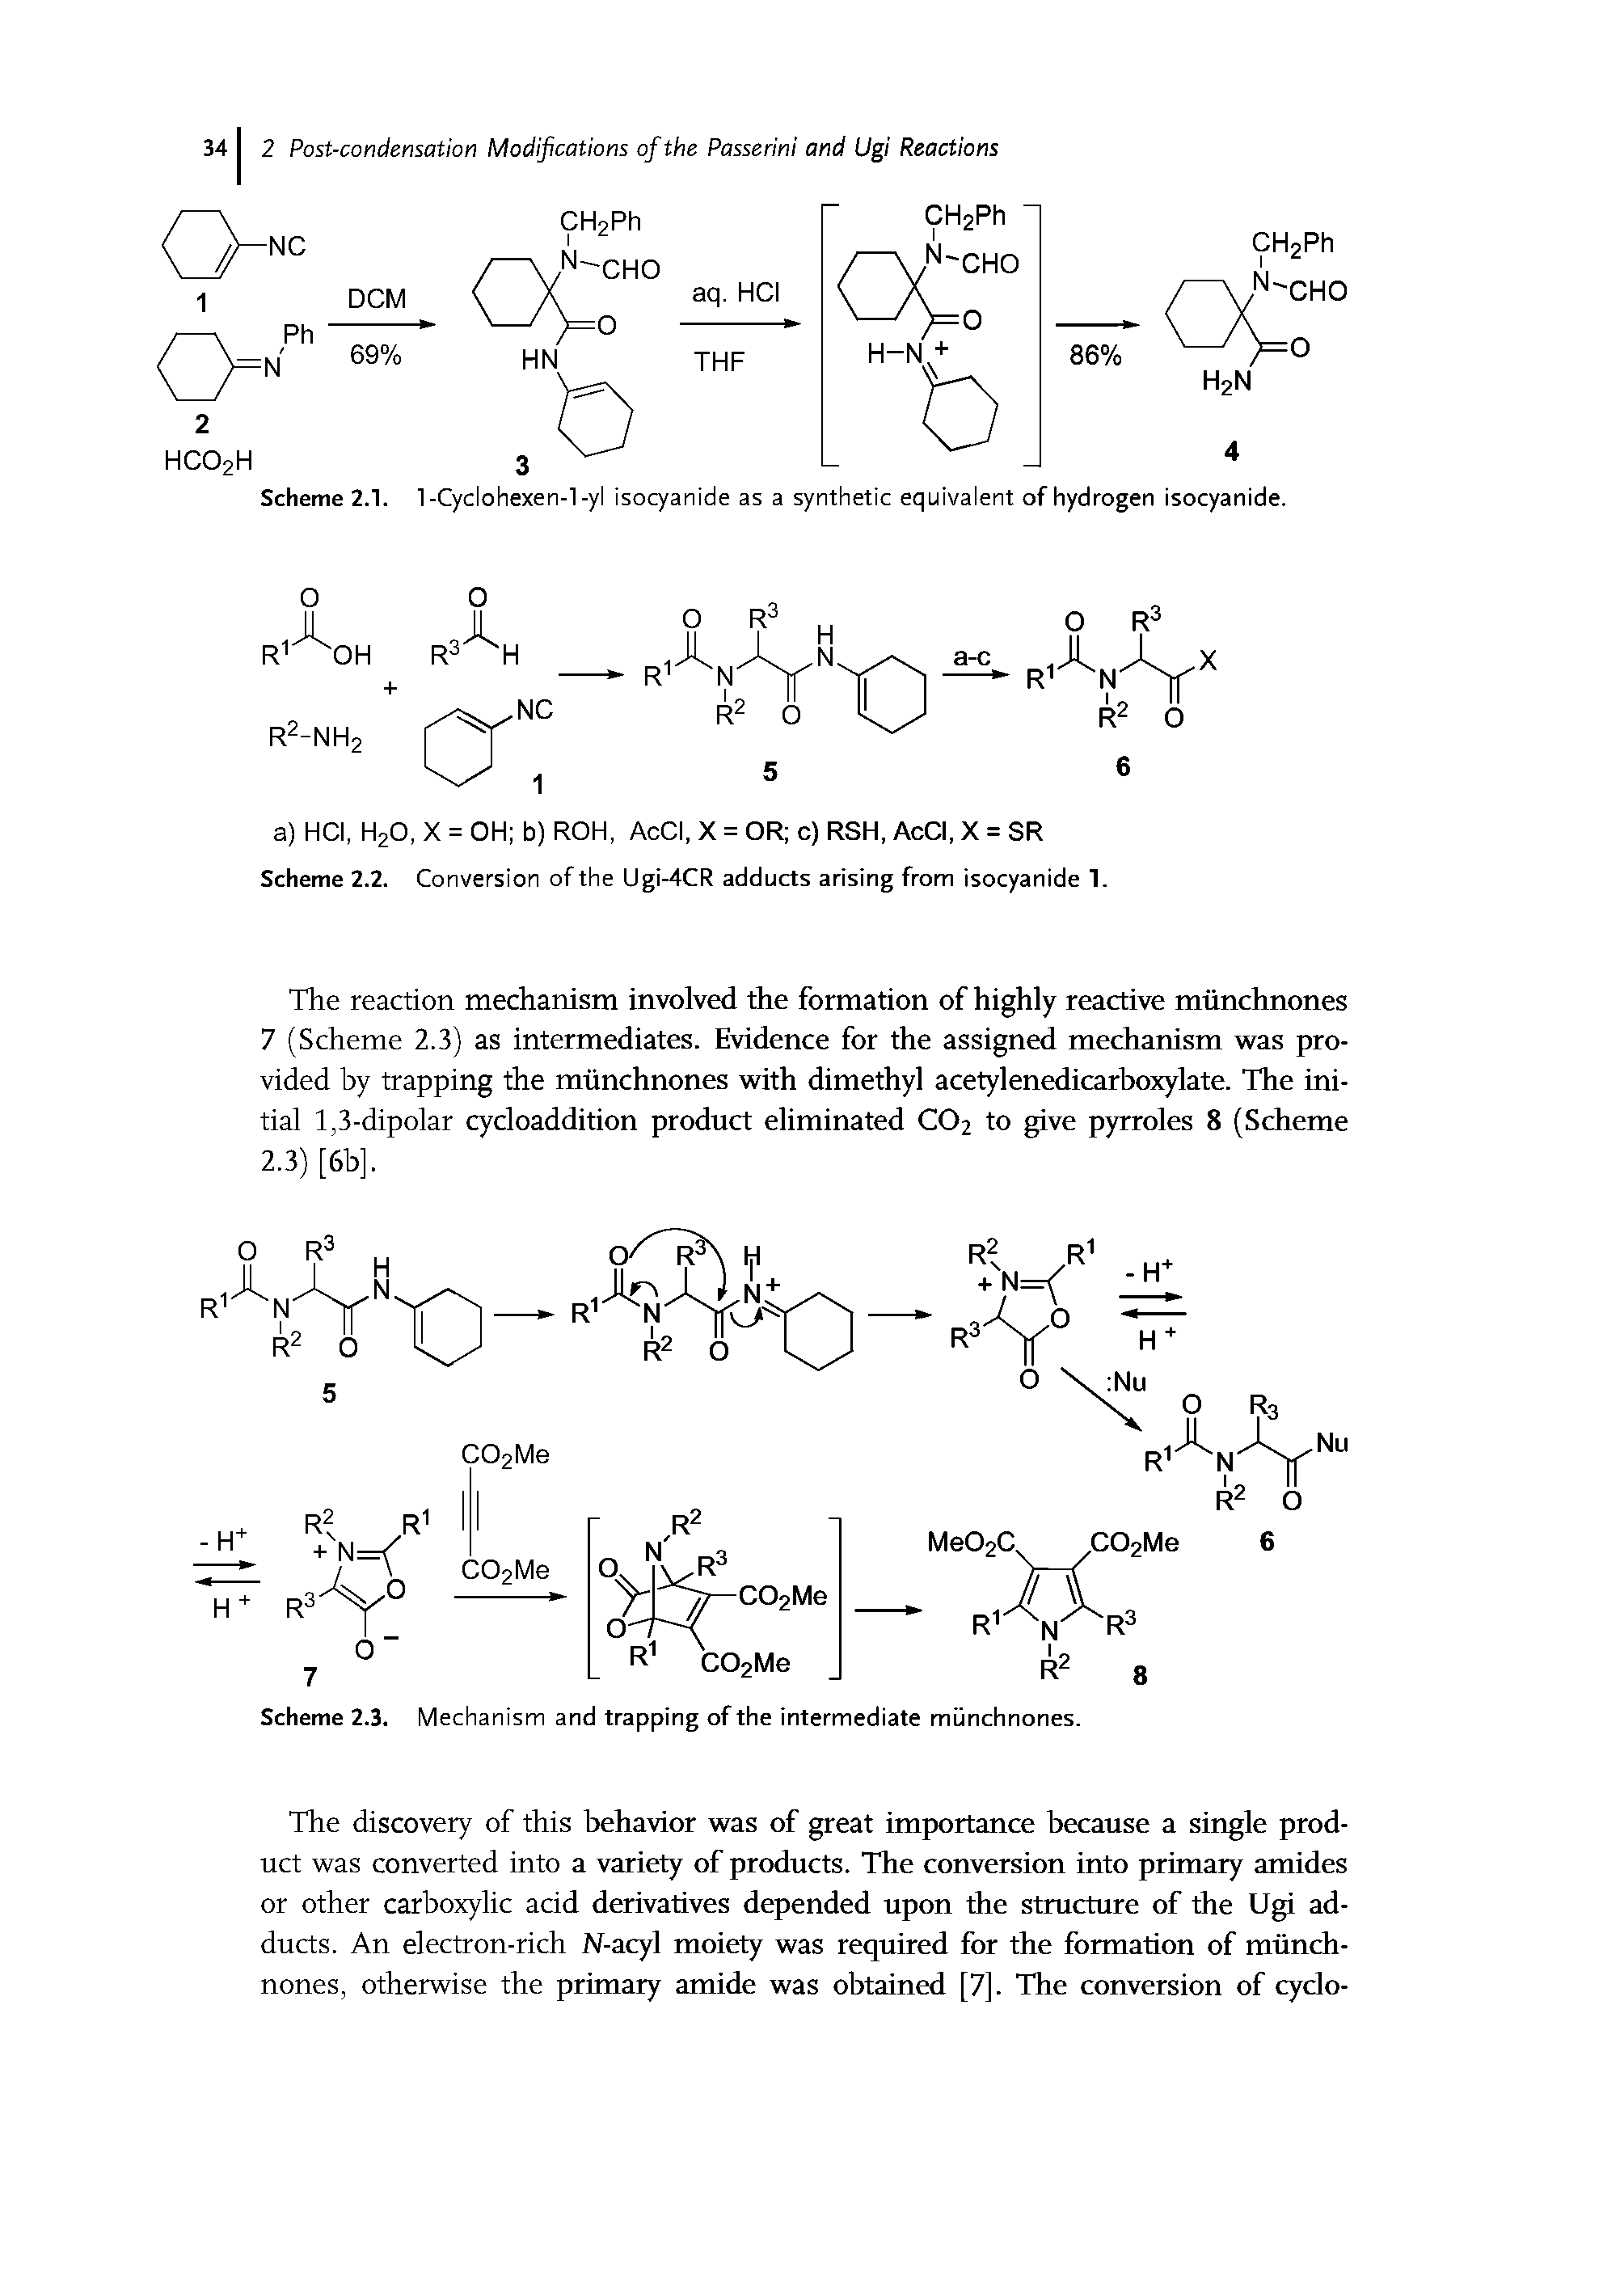 Scheme 2.1. 1-Cyclohexen-1-yl isocyanide as a synthetic equivalent of hydrogen isocyanide.